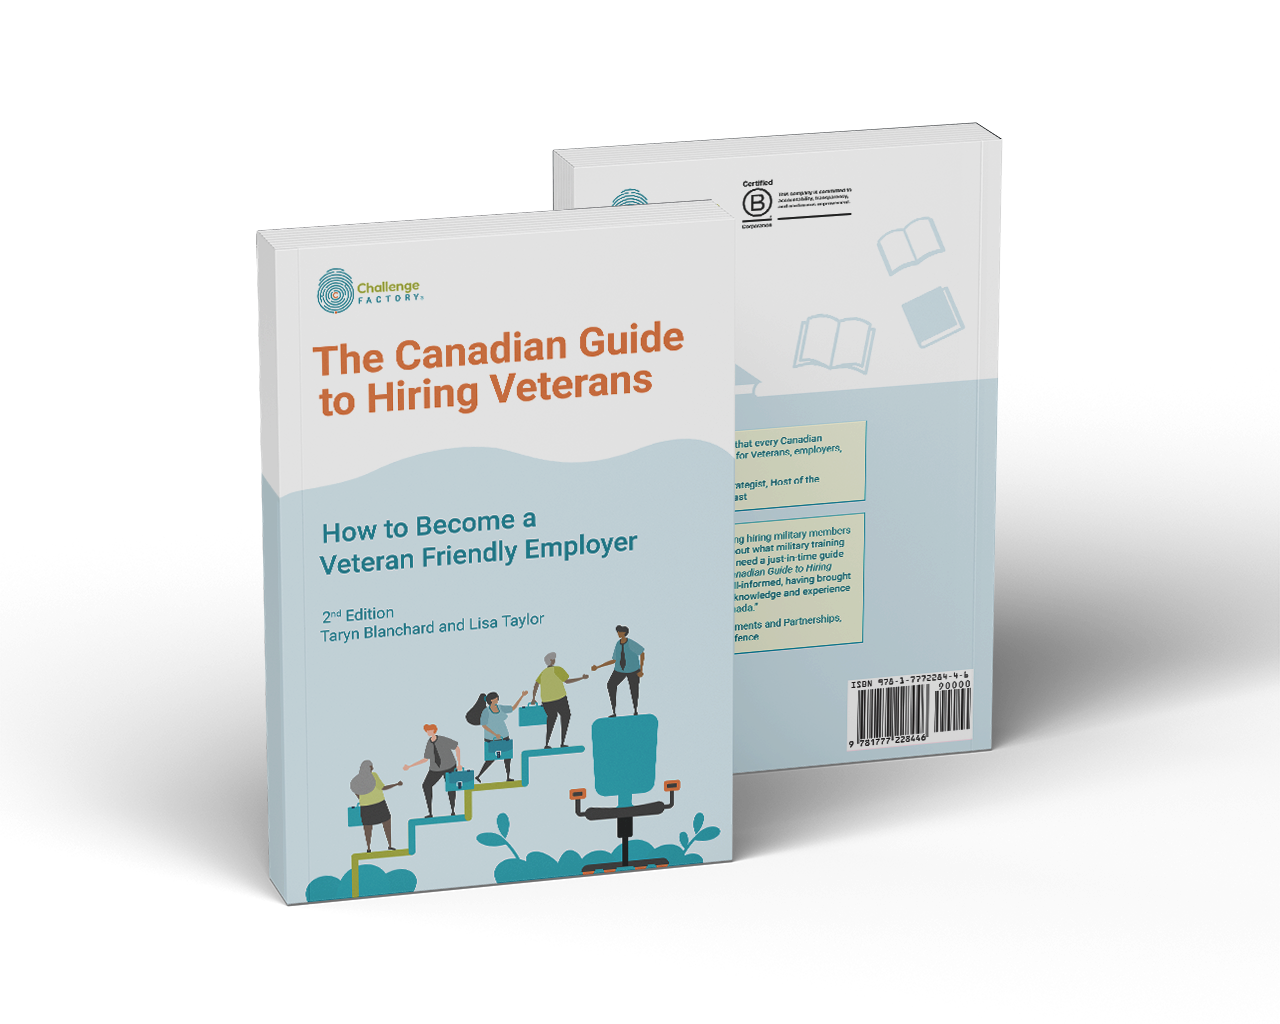 The Canadian Guide to Hiring Veterans